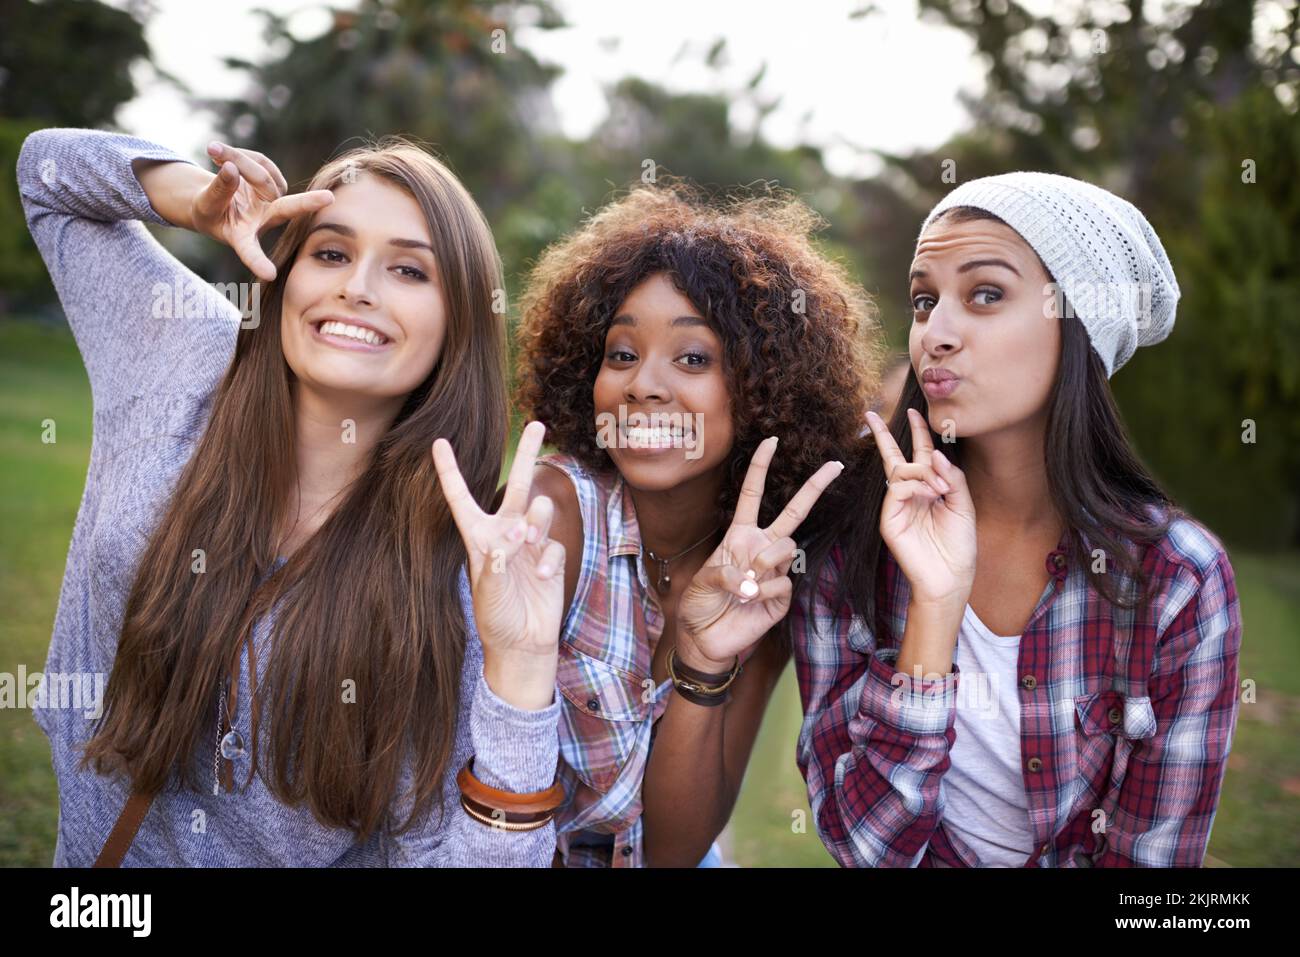 Peace in the park. Cropped portrait of a group of girl friends having fun in the outdoors. Stock Photo